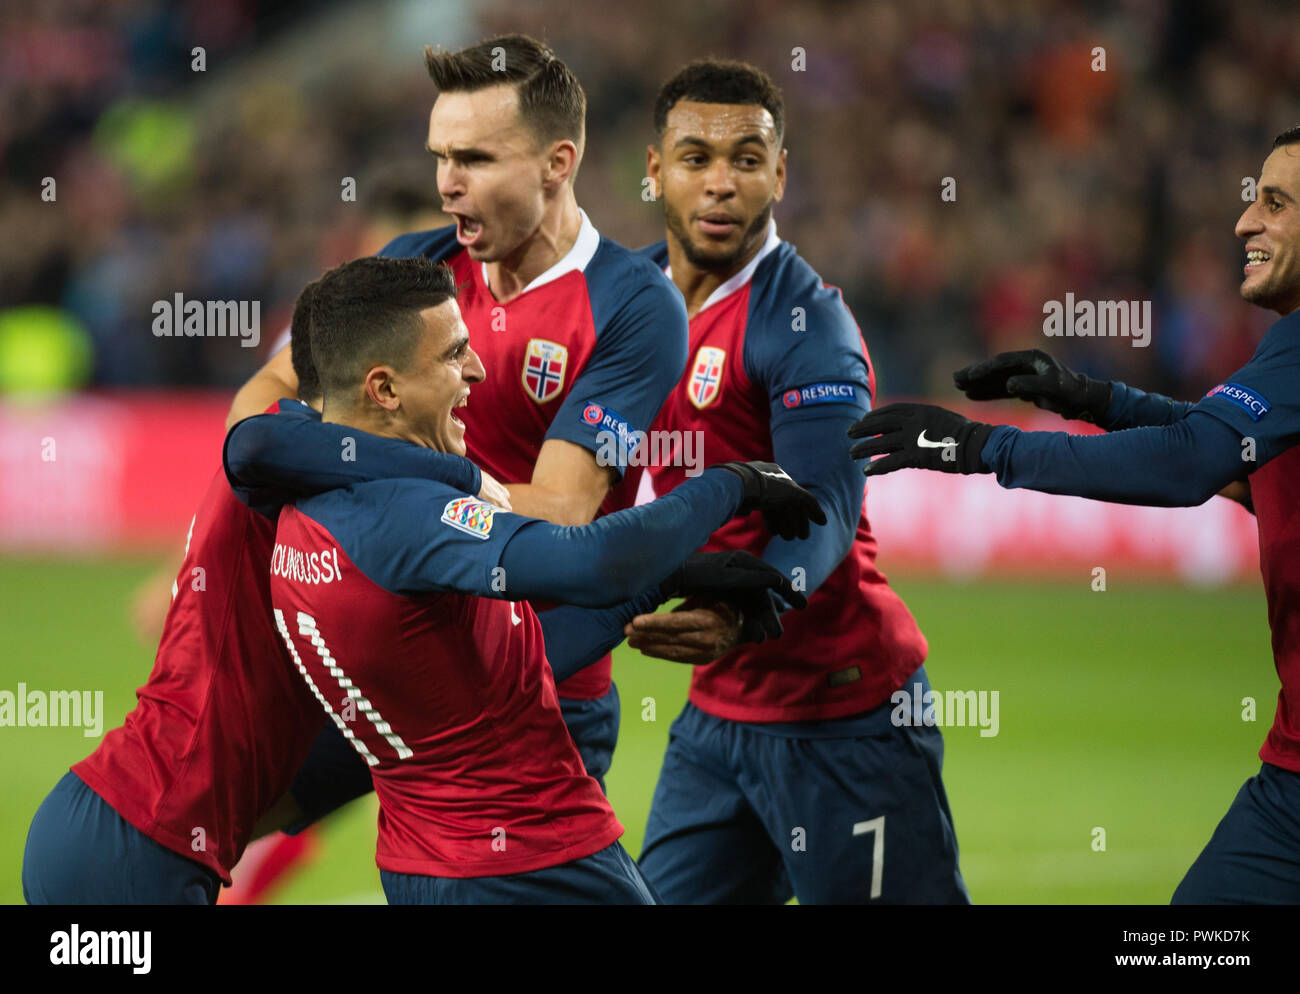 Oslo, Norway. 16th Oct, 2018. Mohamed Elyounoussi (11) of Norway scores for 1-0 and is surrounded by team mates during the UEFA Nations League football match between Norway and Bulgaria at Ullevaal Stadion. (Photo credit: Gonzales Photo - Jan-Erik Eriksen). Credit: Gonzales Photo/Alamy Live News Stock Photo